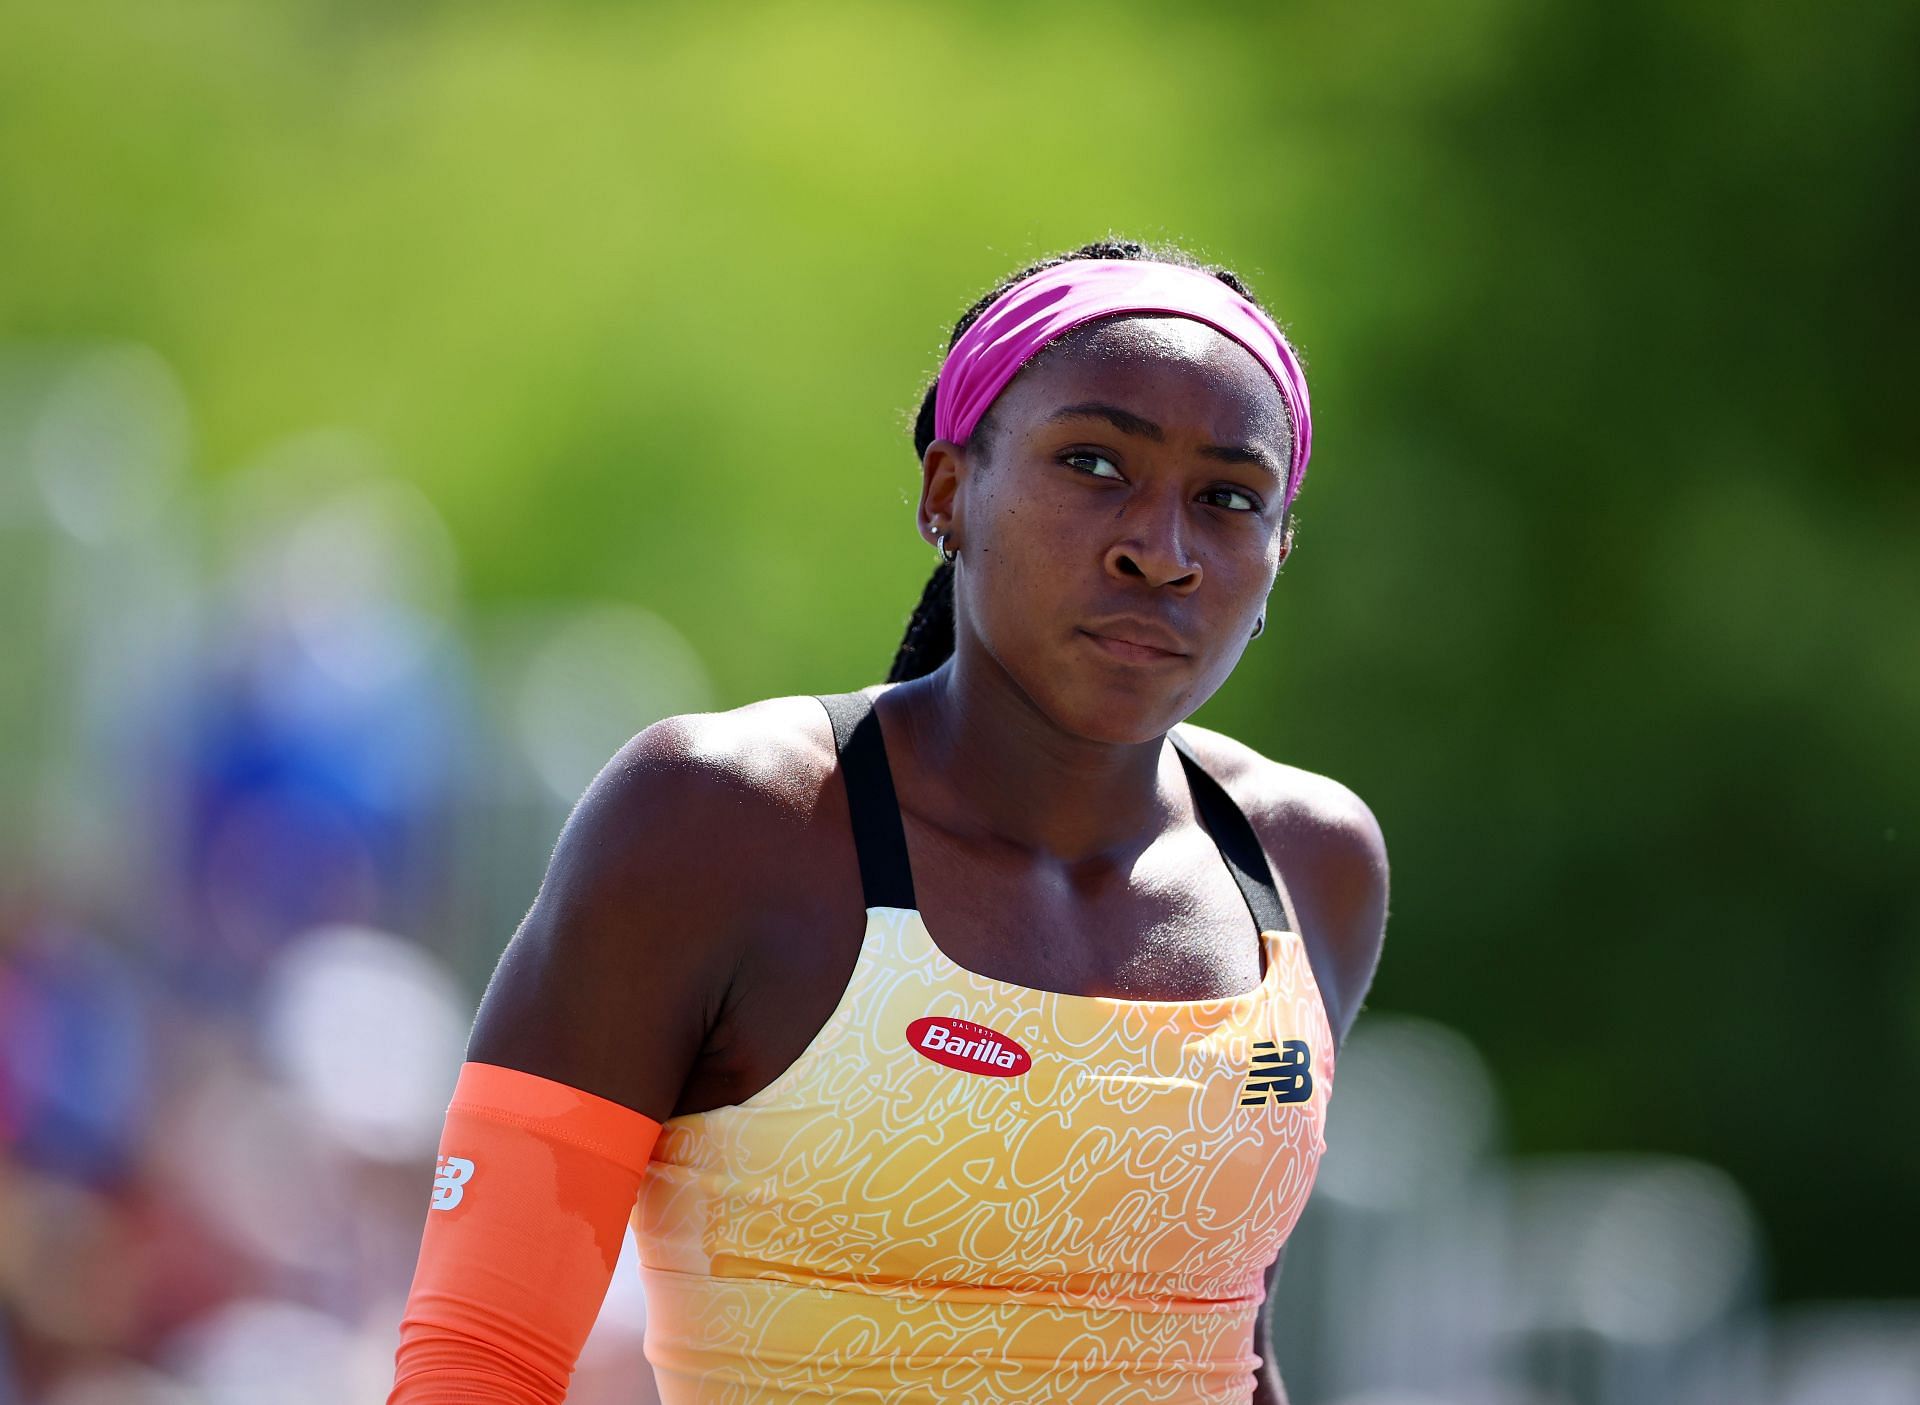 Coco Gauff at the National Bank Open Toronto.